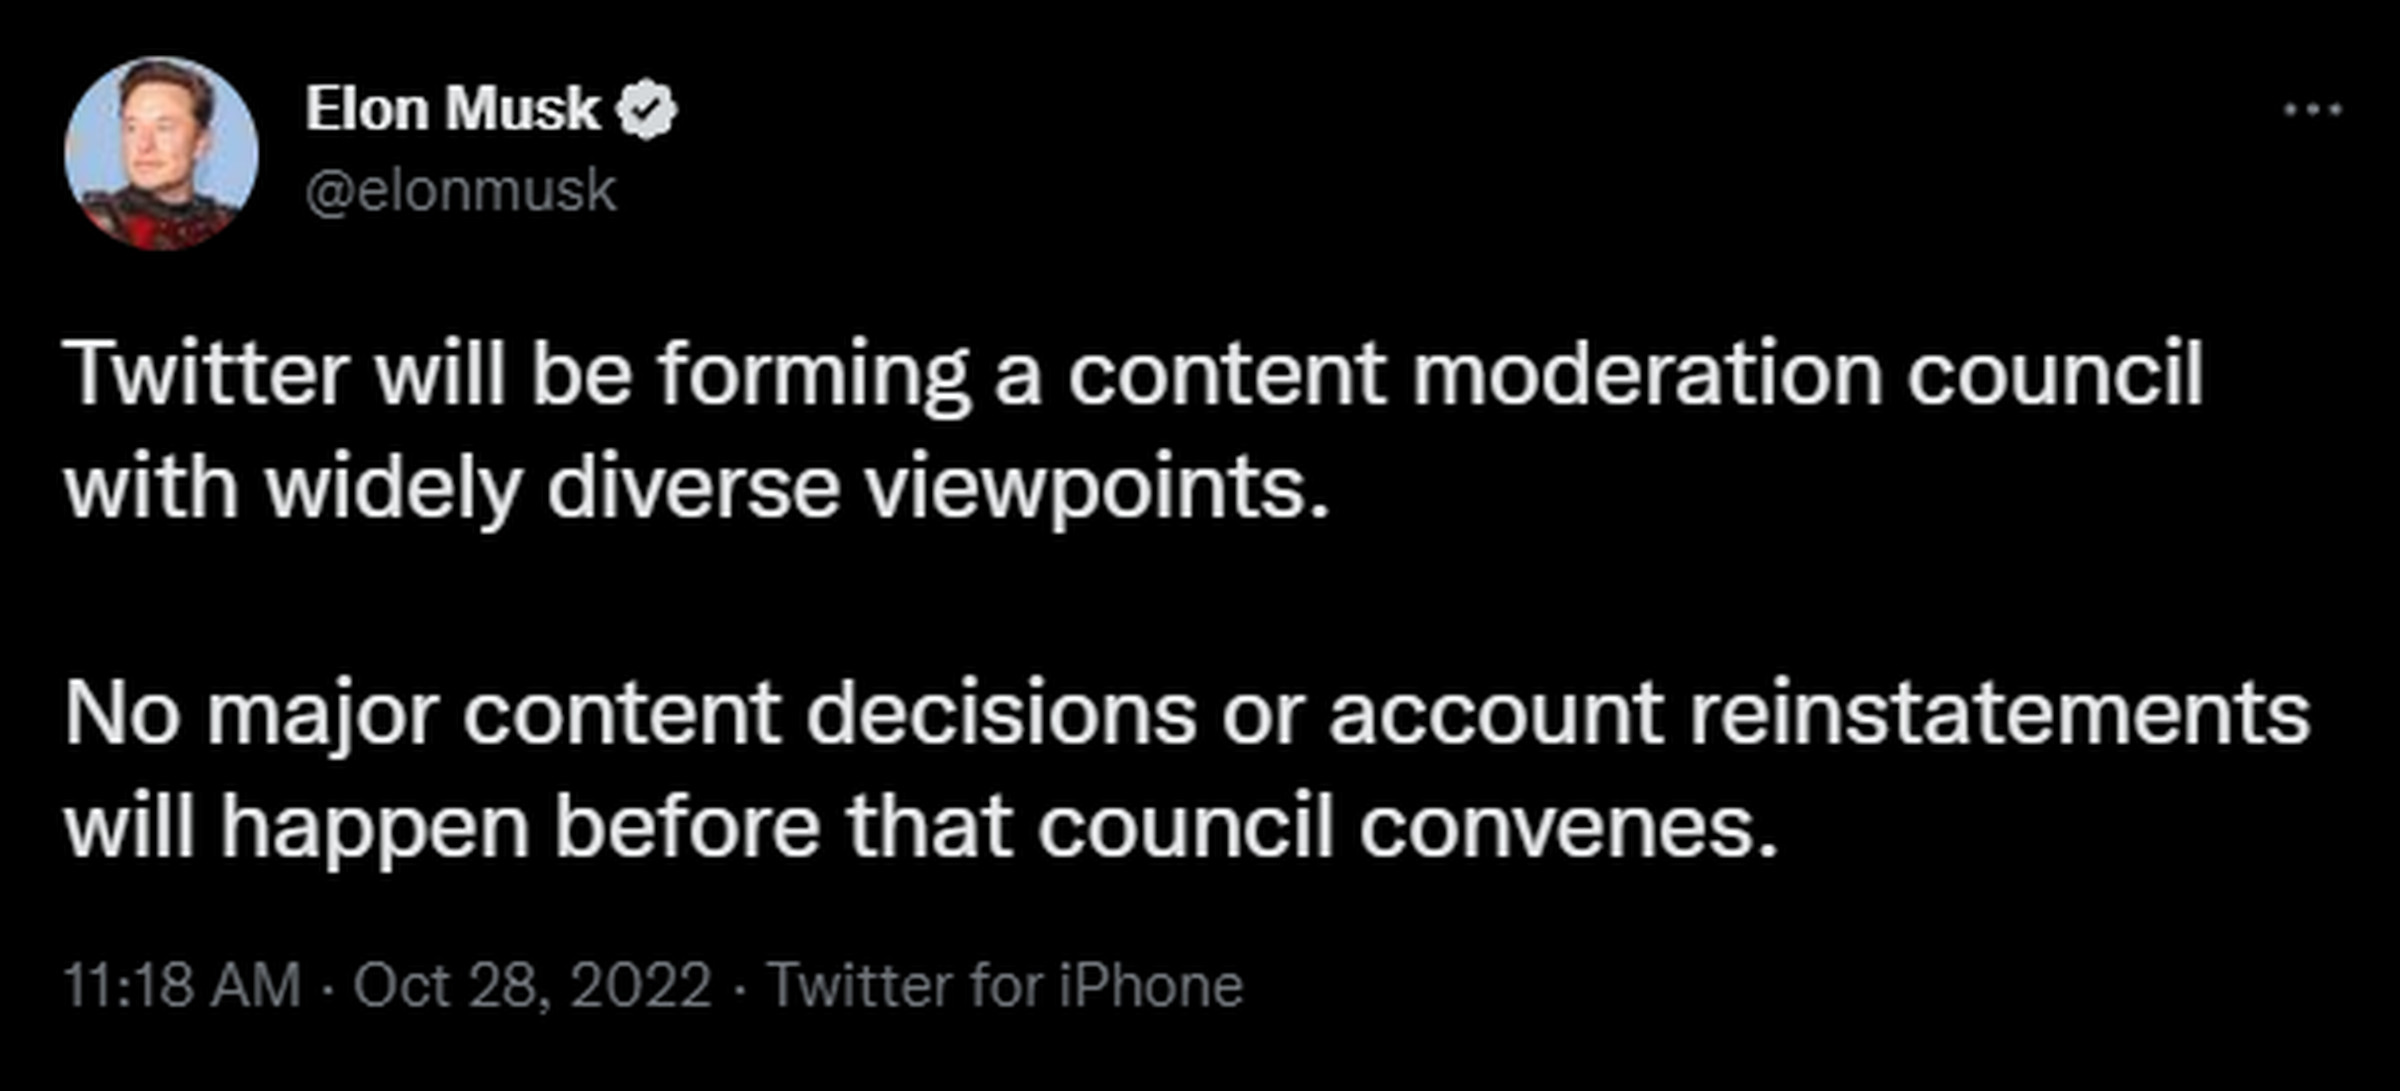 “There will never be any major substantive decisions or account recovery [the content moderation council] comes together,” Musk wrote in late October.